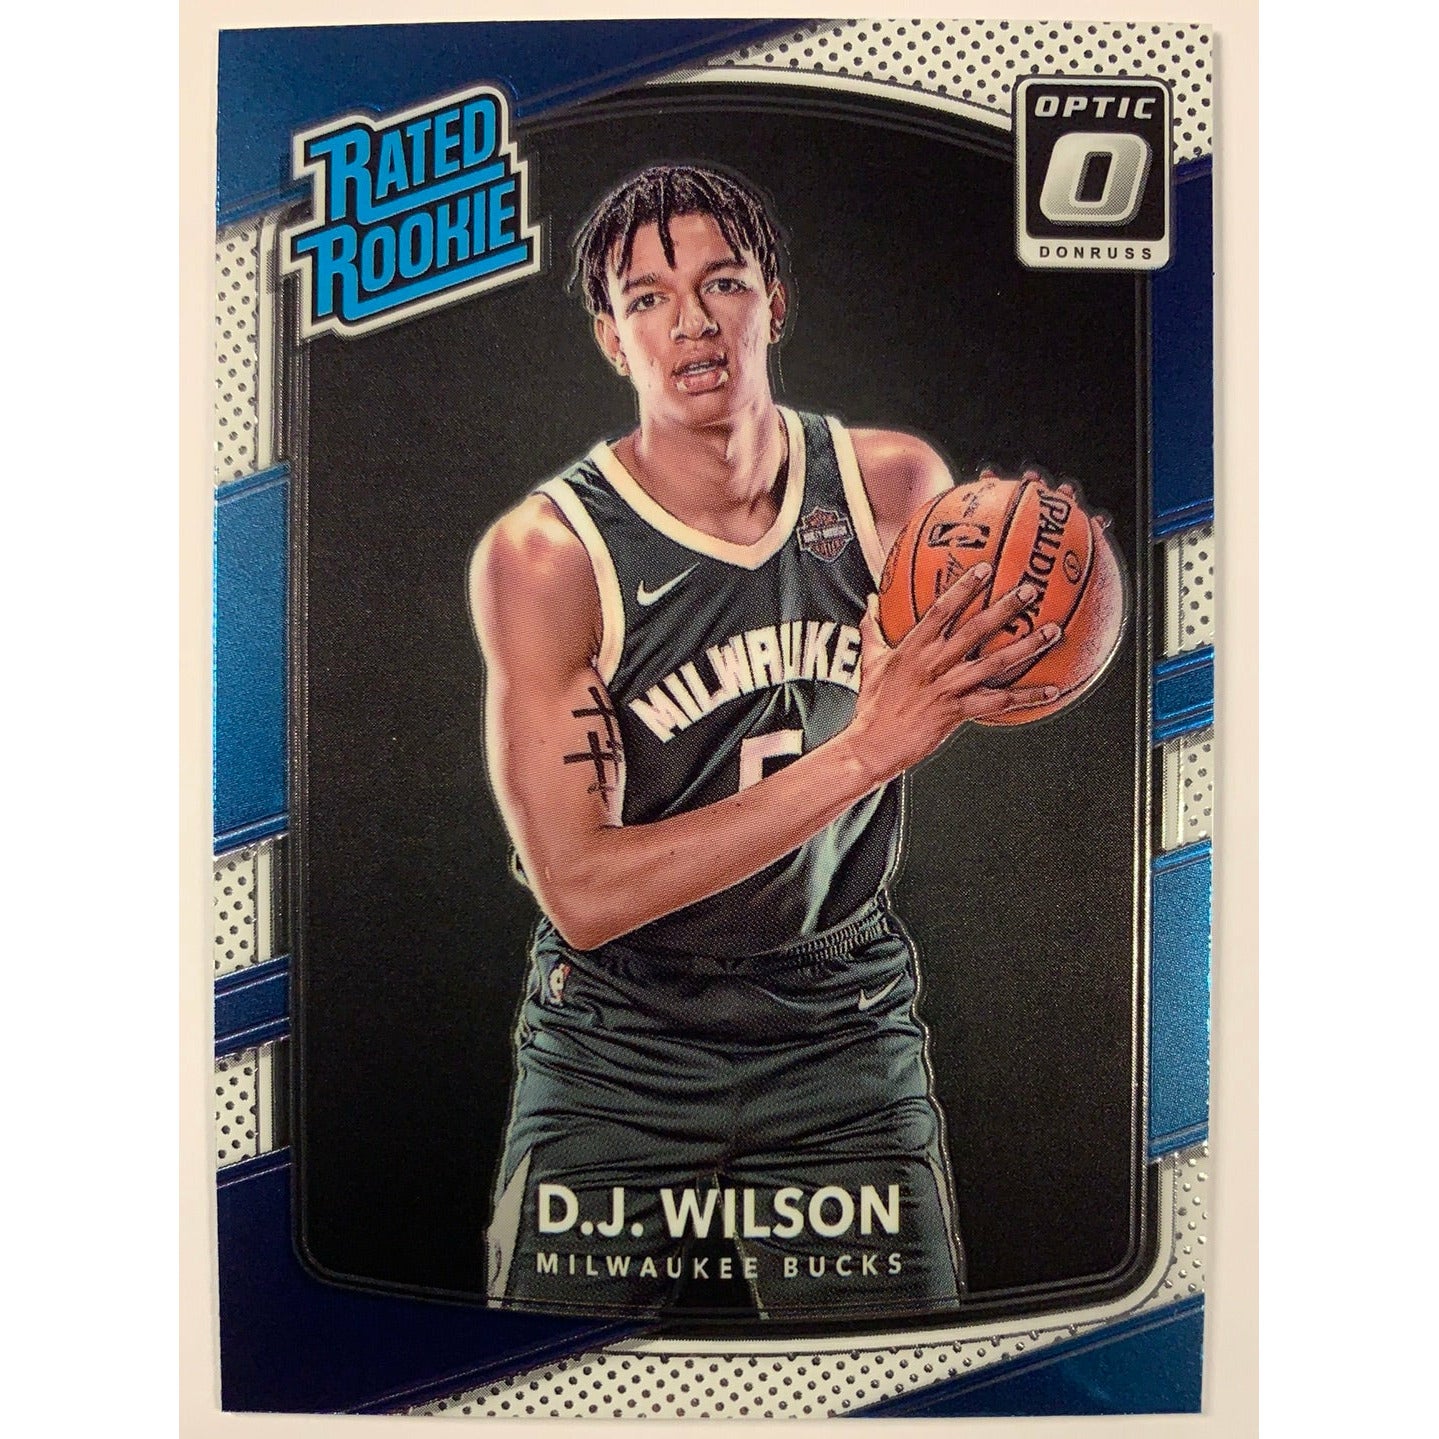  2017-18 Donruss Optic DJ Wilson Rated Rookie  Local Legends Cards & Collectibles